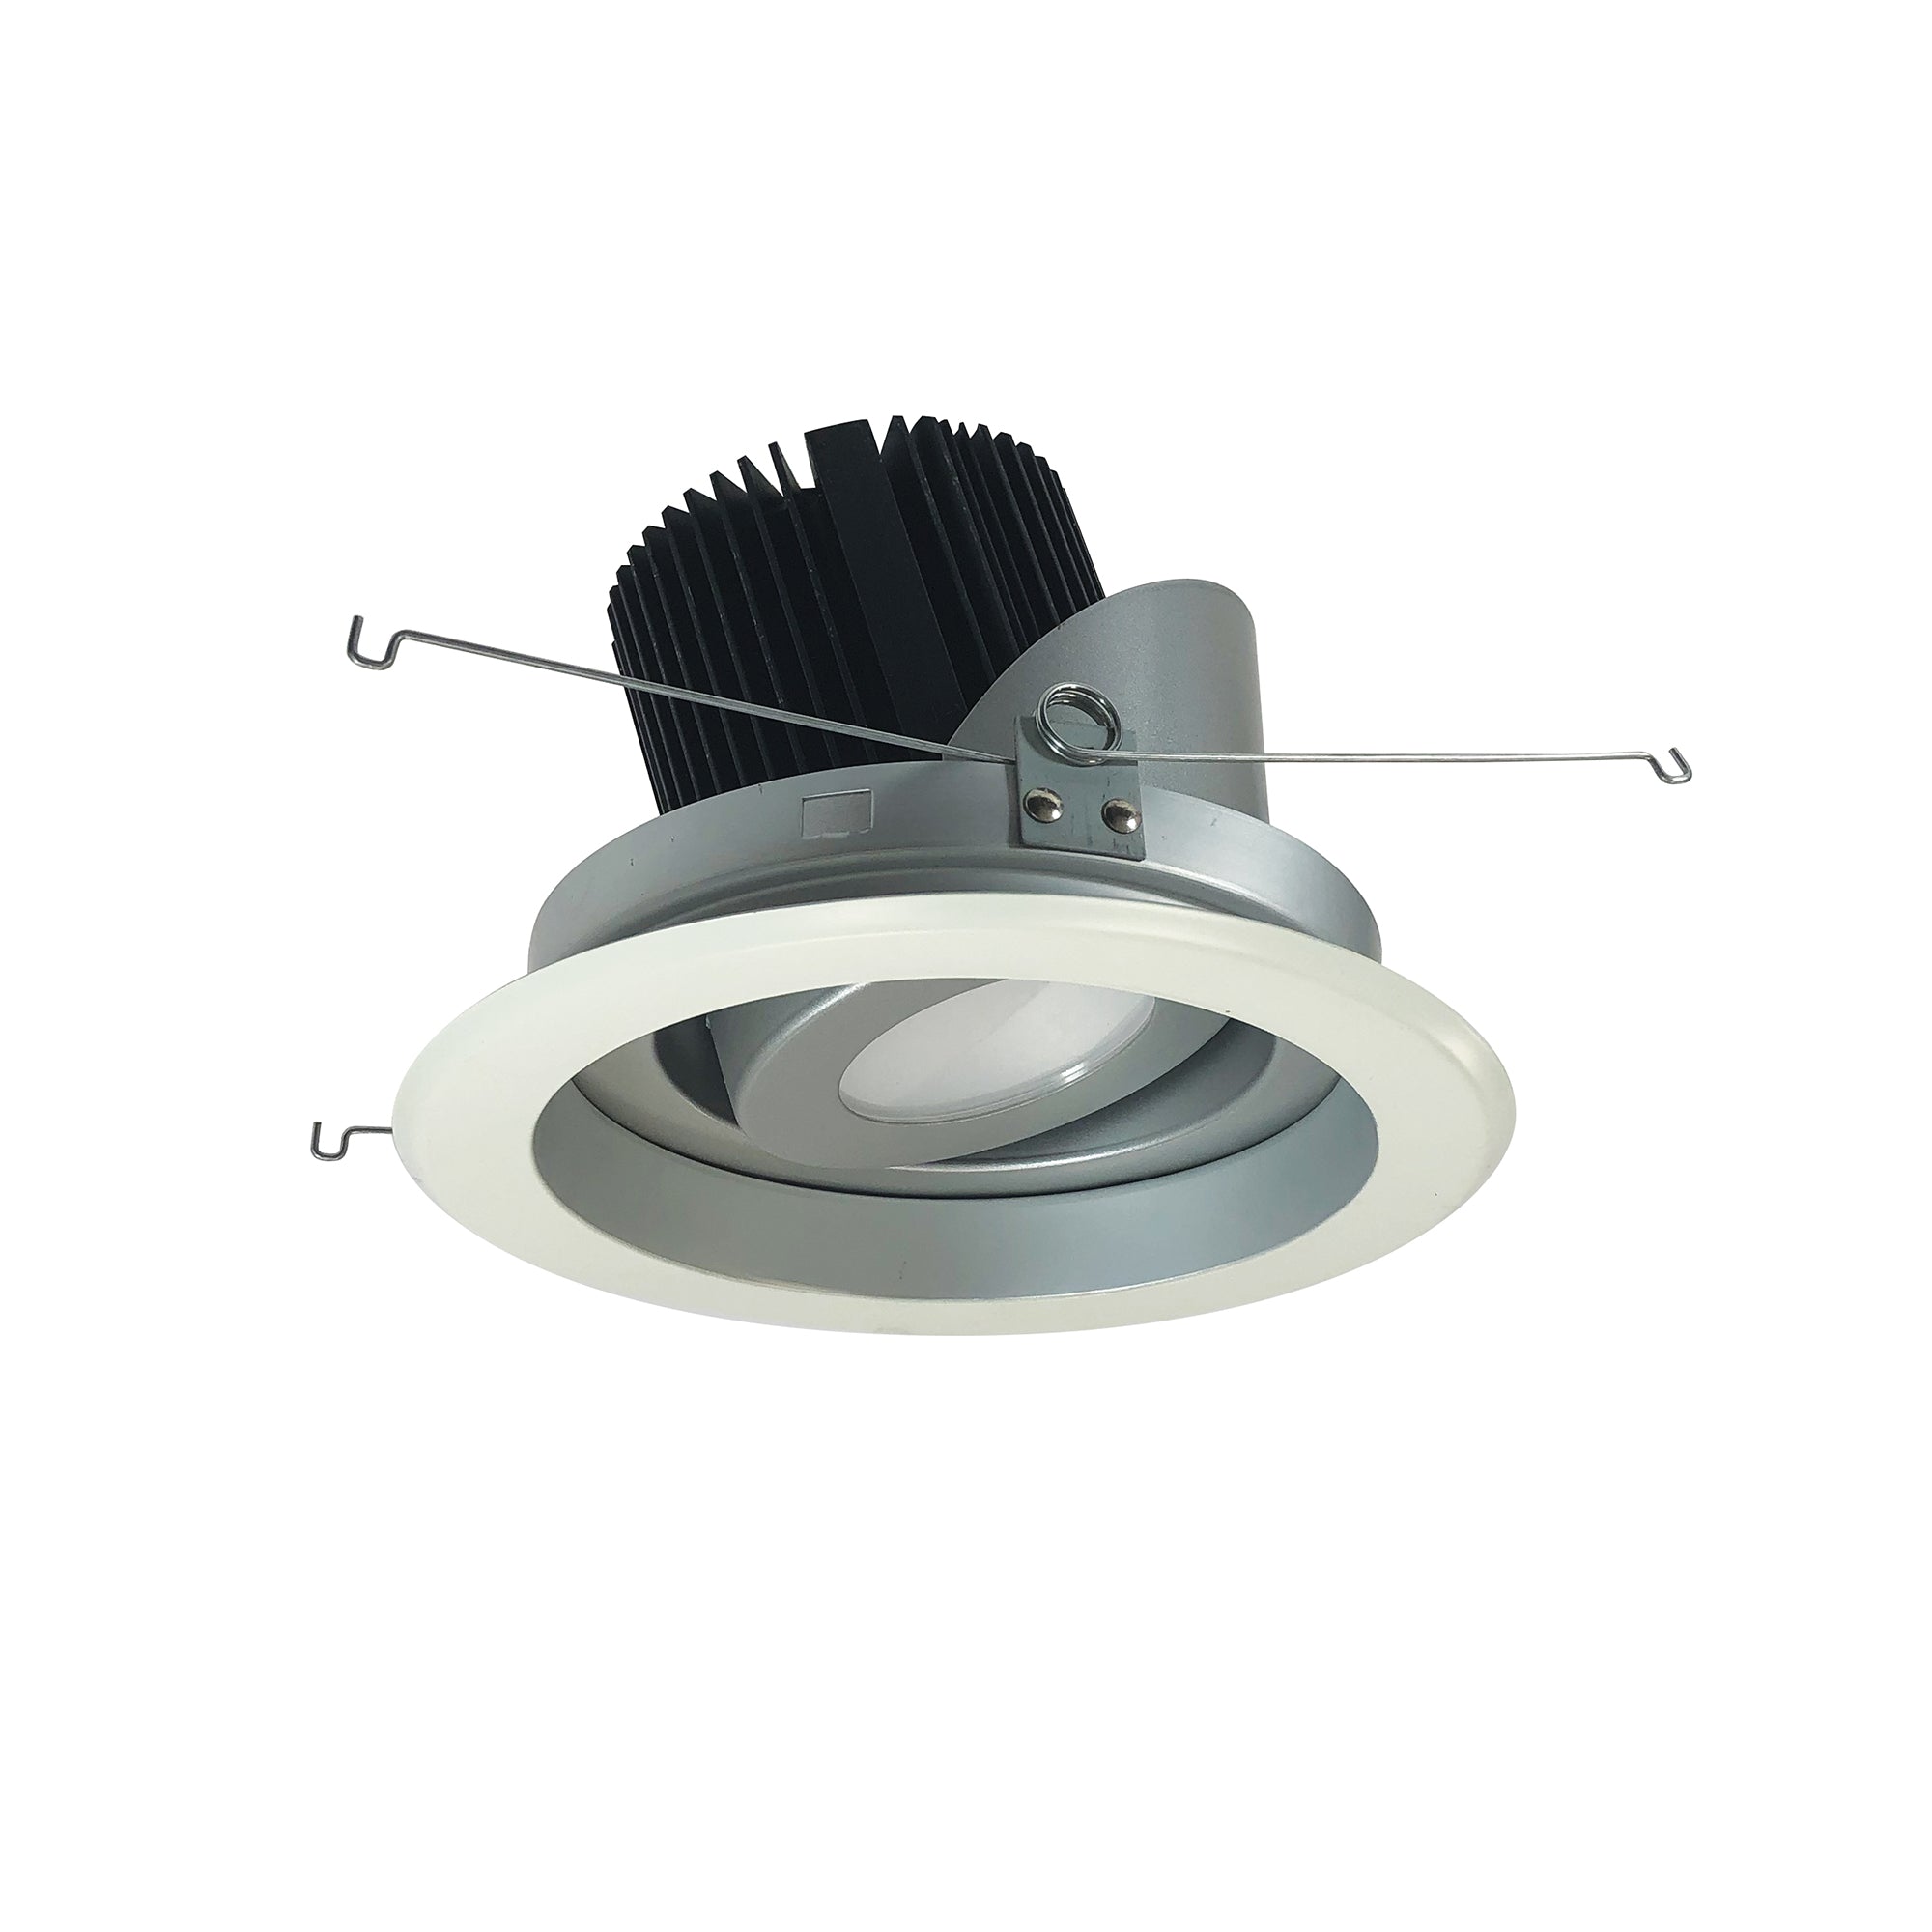 Nora Lighting NRM2-619L2535SHZW - Recessed - 6 Inch Marquise II Round Regressed Adj. Reflector, Spot, 2500lm, 3500K, Haze/White (Not Compatible with NHRM2-625 Housings)